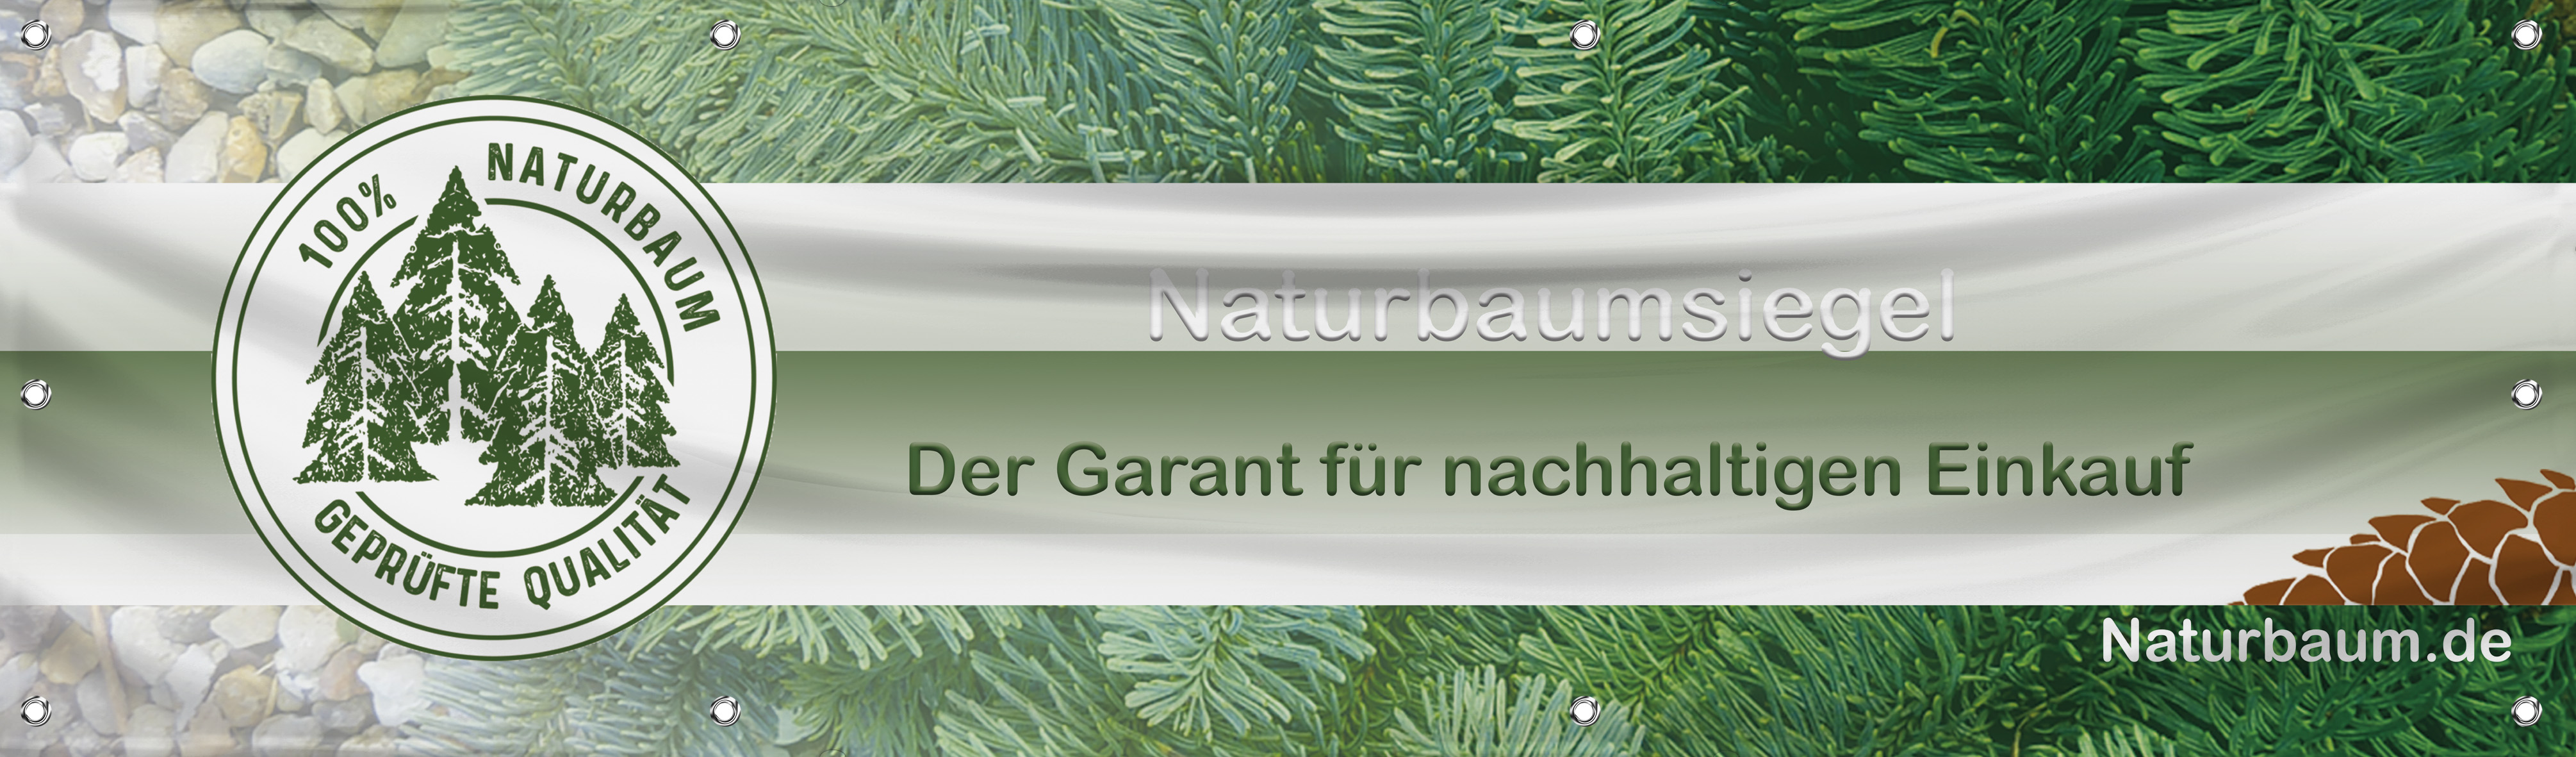 Banner Natural Tree - 160 x 40 cm